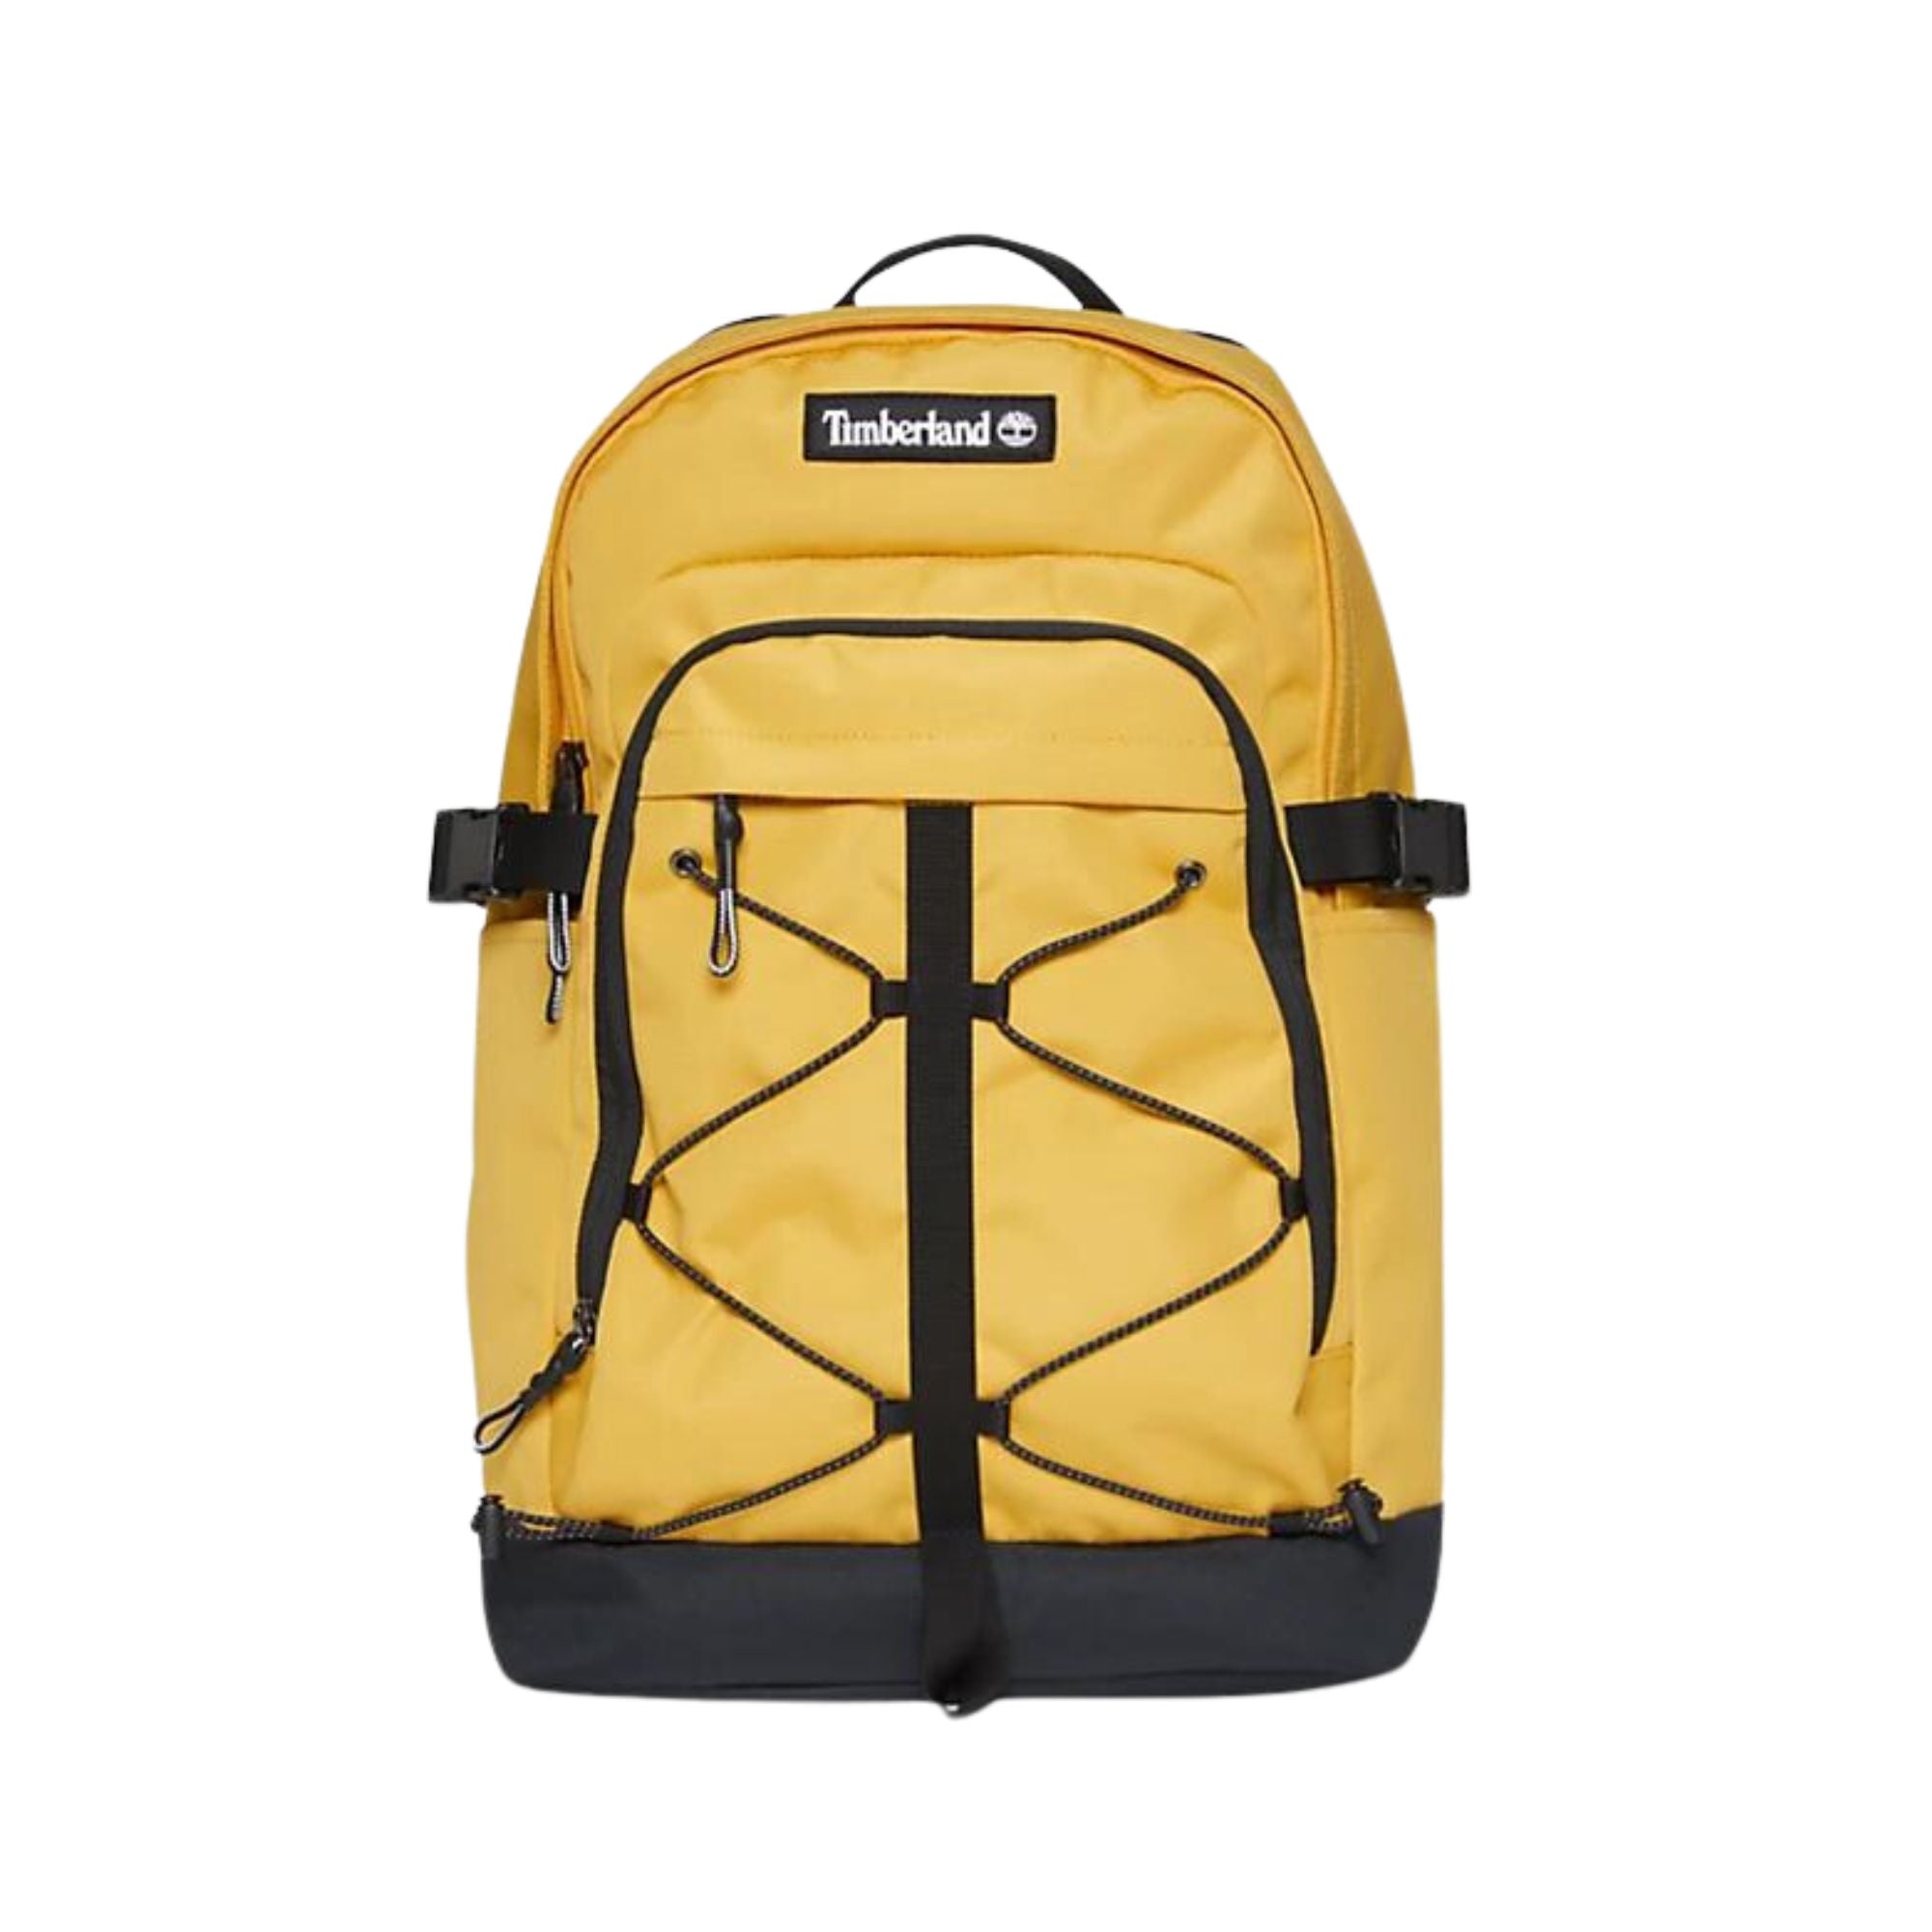 Timberland Bag - Sling - A2HH4-033 - Online shop for sneakers, shoes and  boots